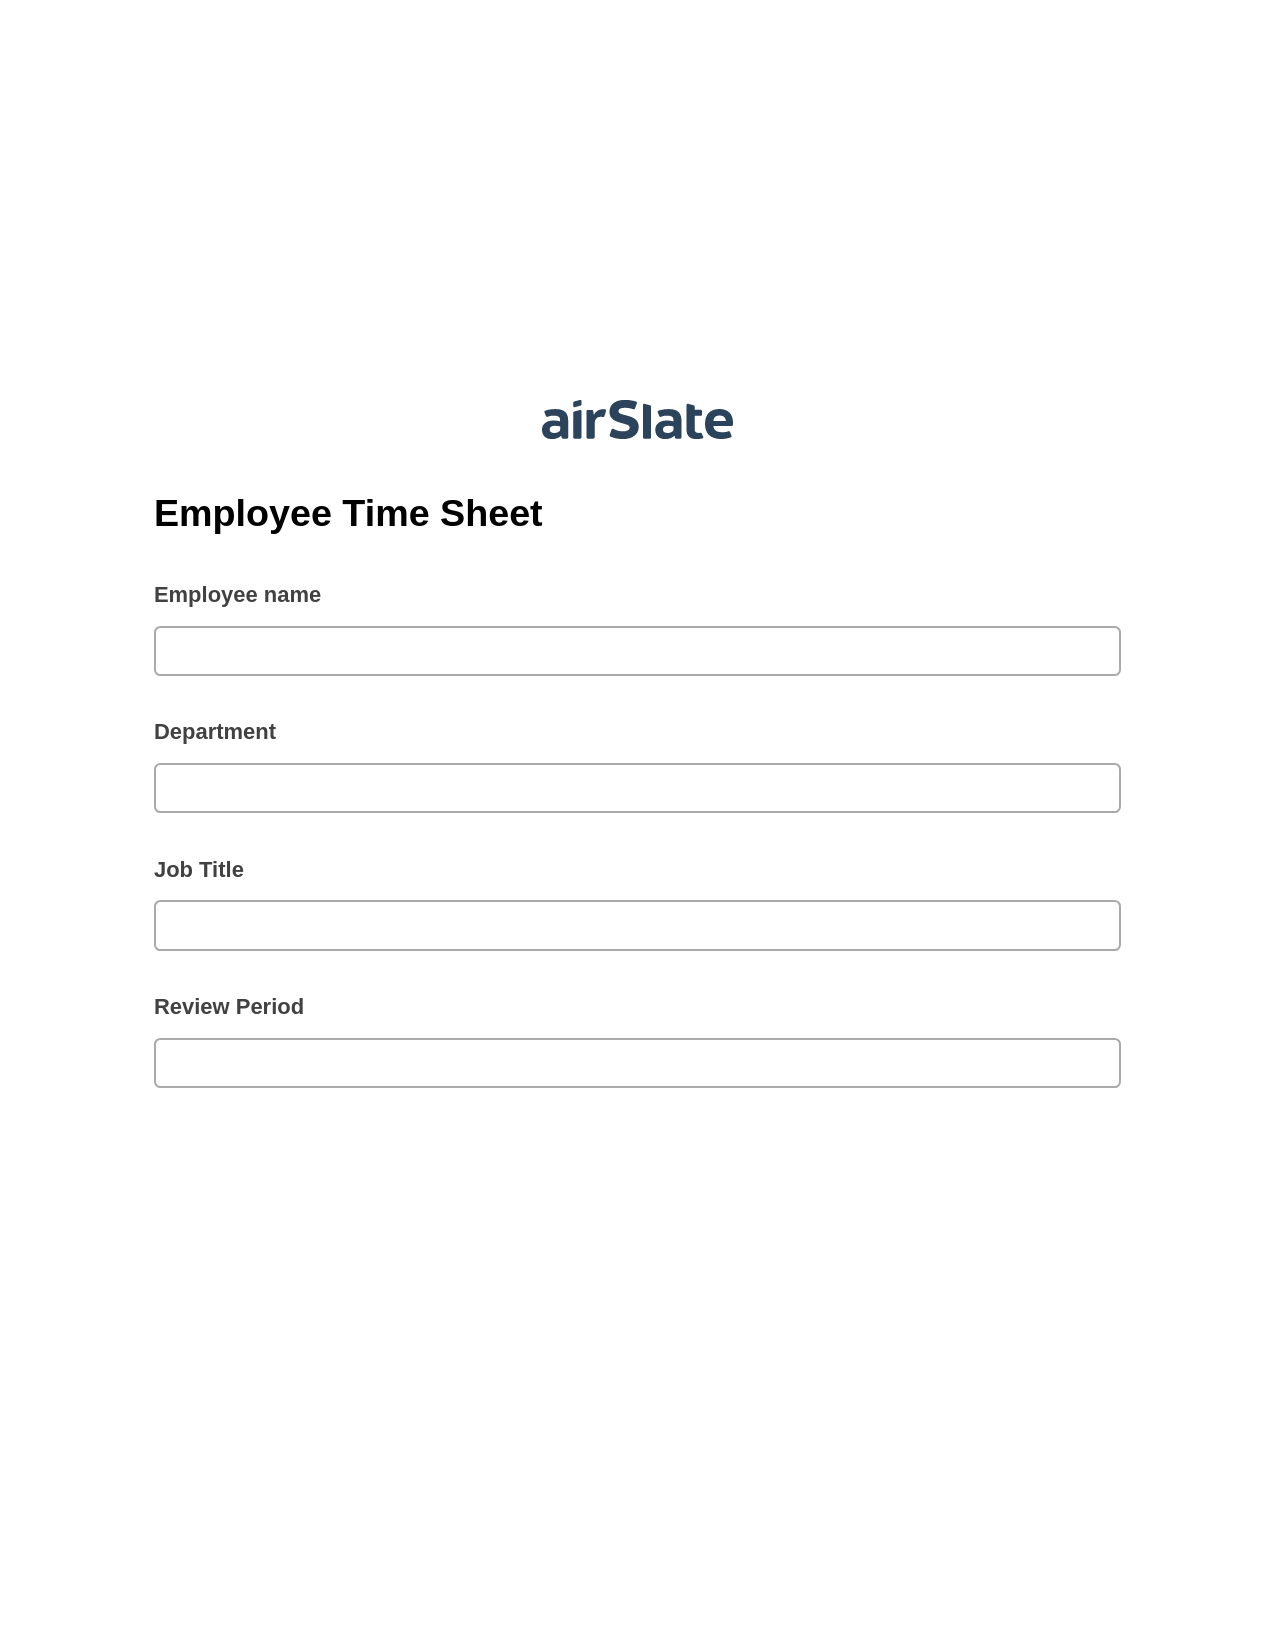 Multirole Employee Time Sheet Pre-fill from Salesforce Records with SOQL Bot, Create slate addon, Archive to OneDrive Bot